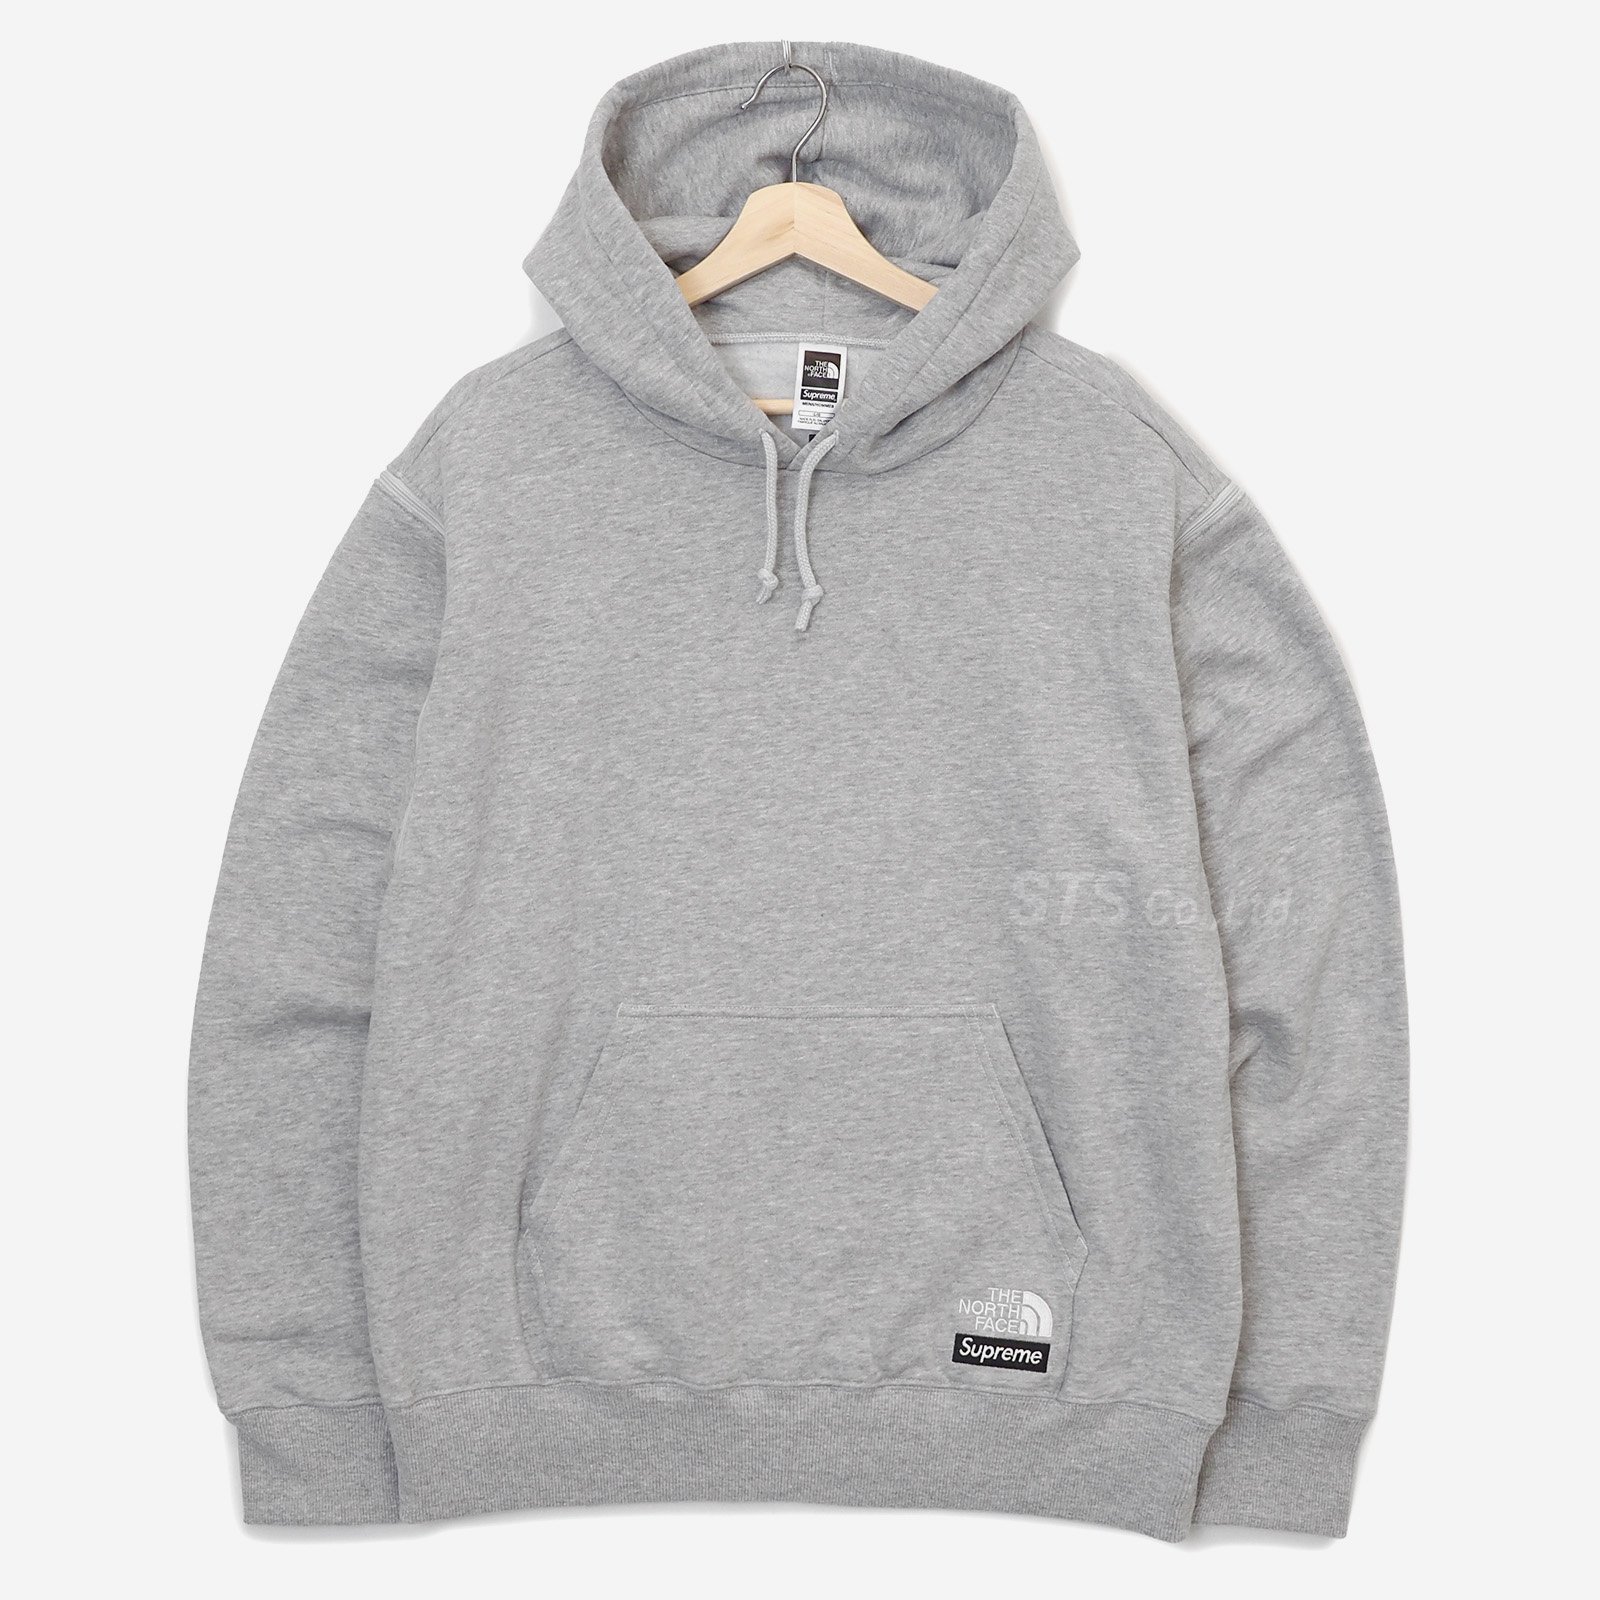 Supreme/The North Face Convertible Hooded Sweatshirt - ParkSIDER